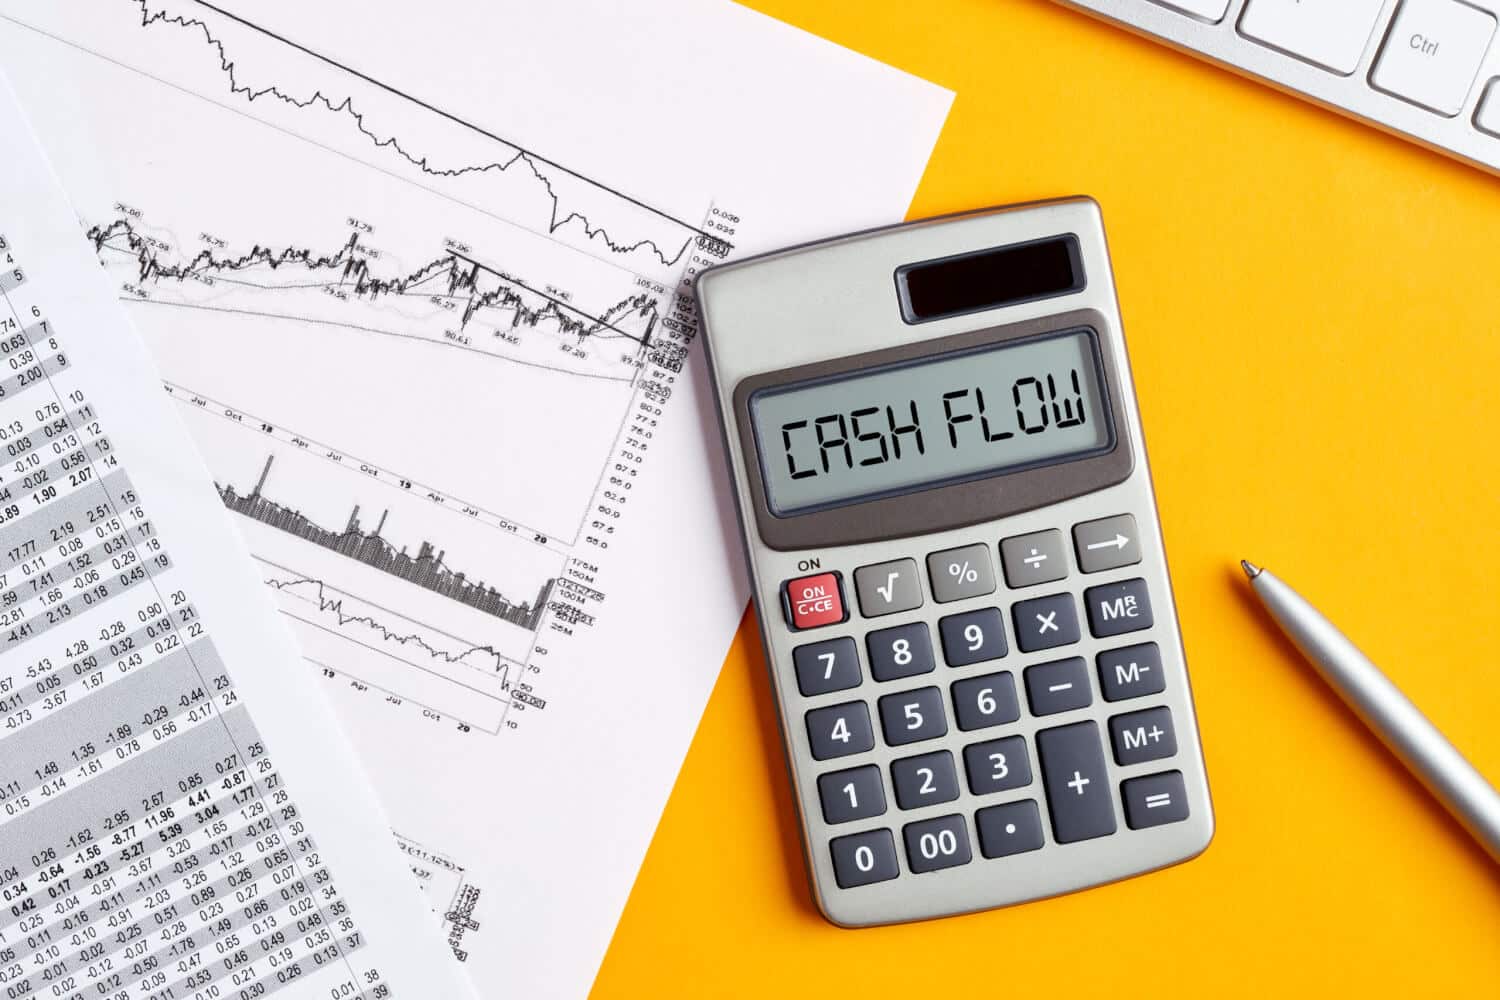 The word cash flow displays on a calculator screen with a business office desktop.